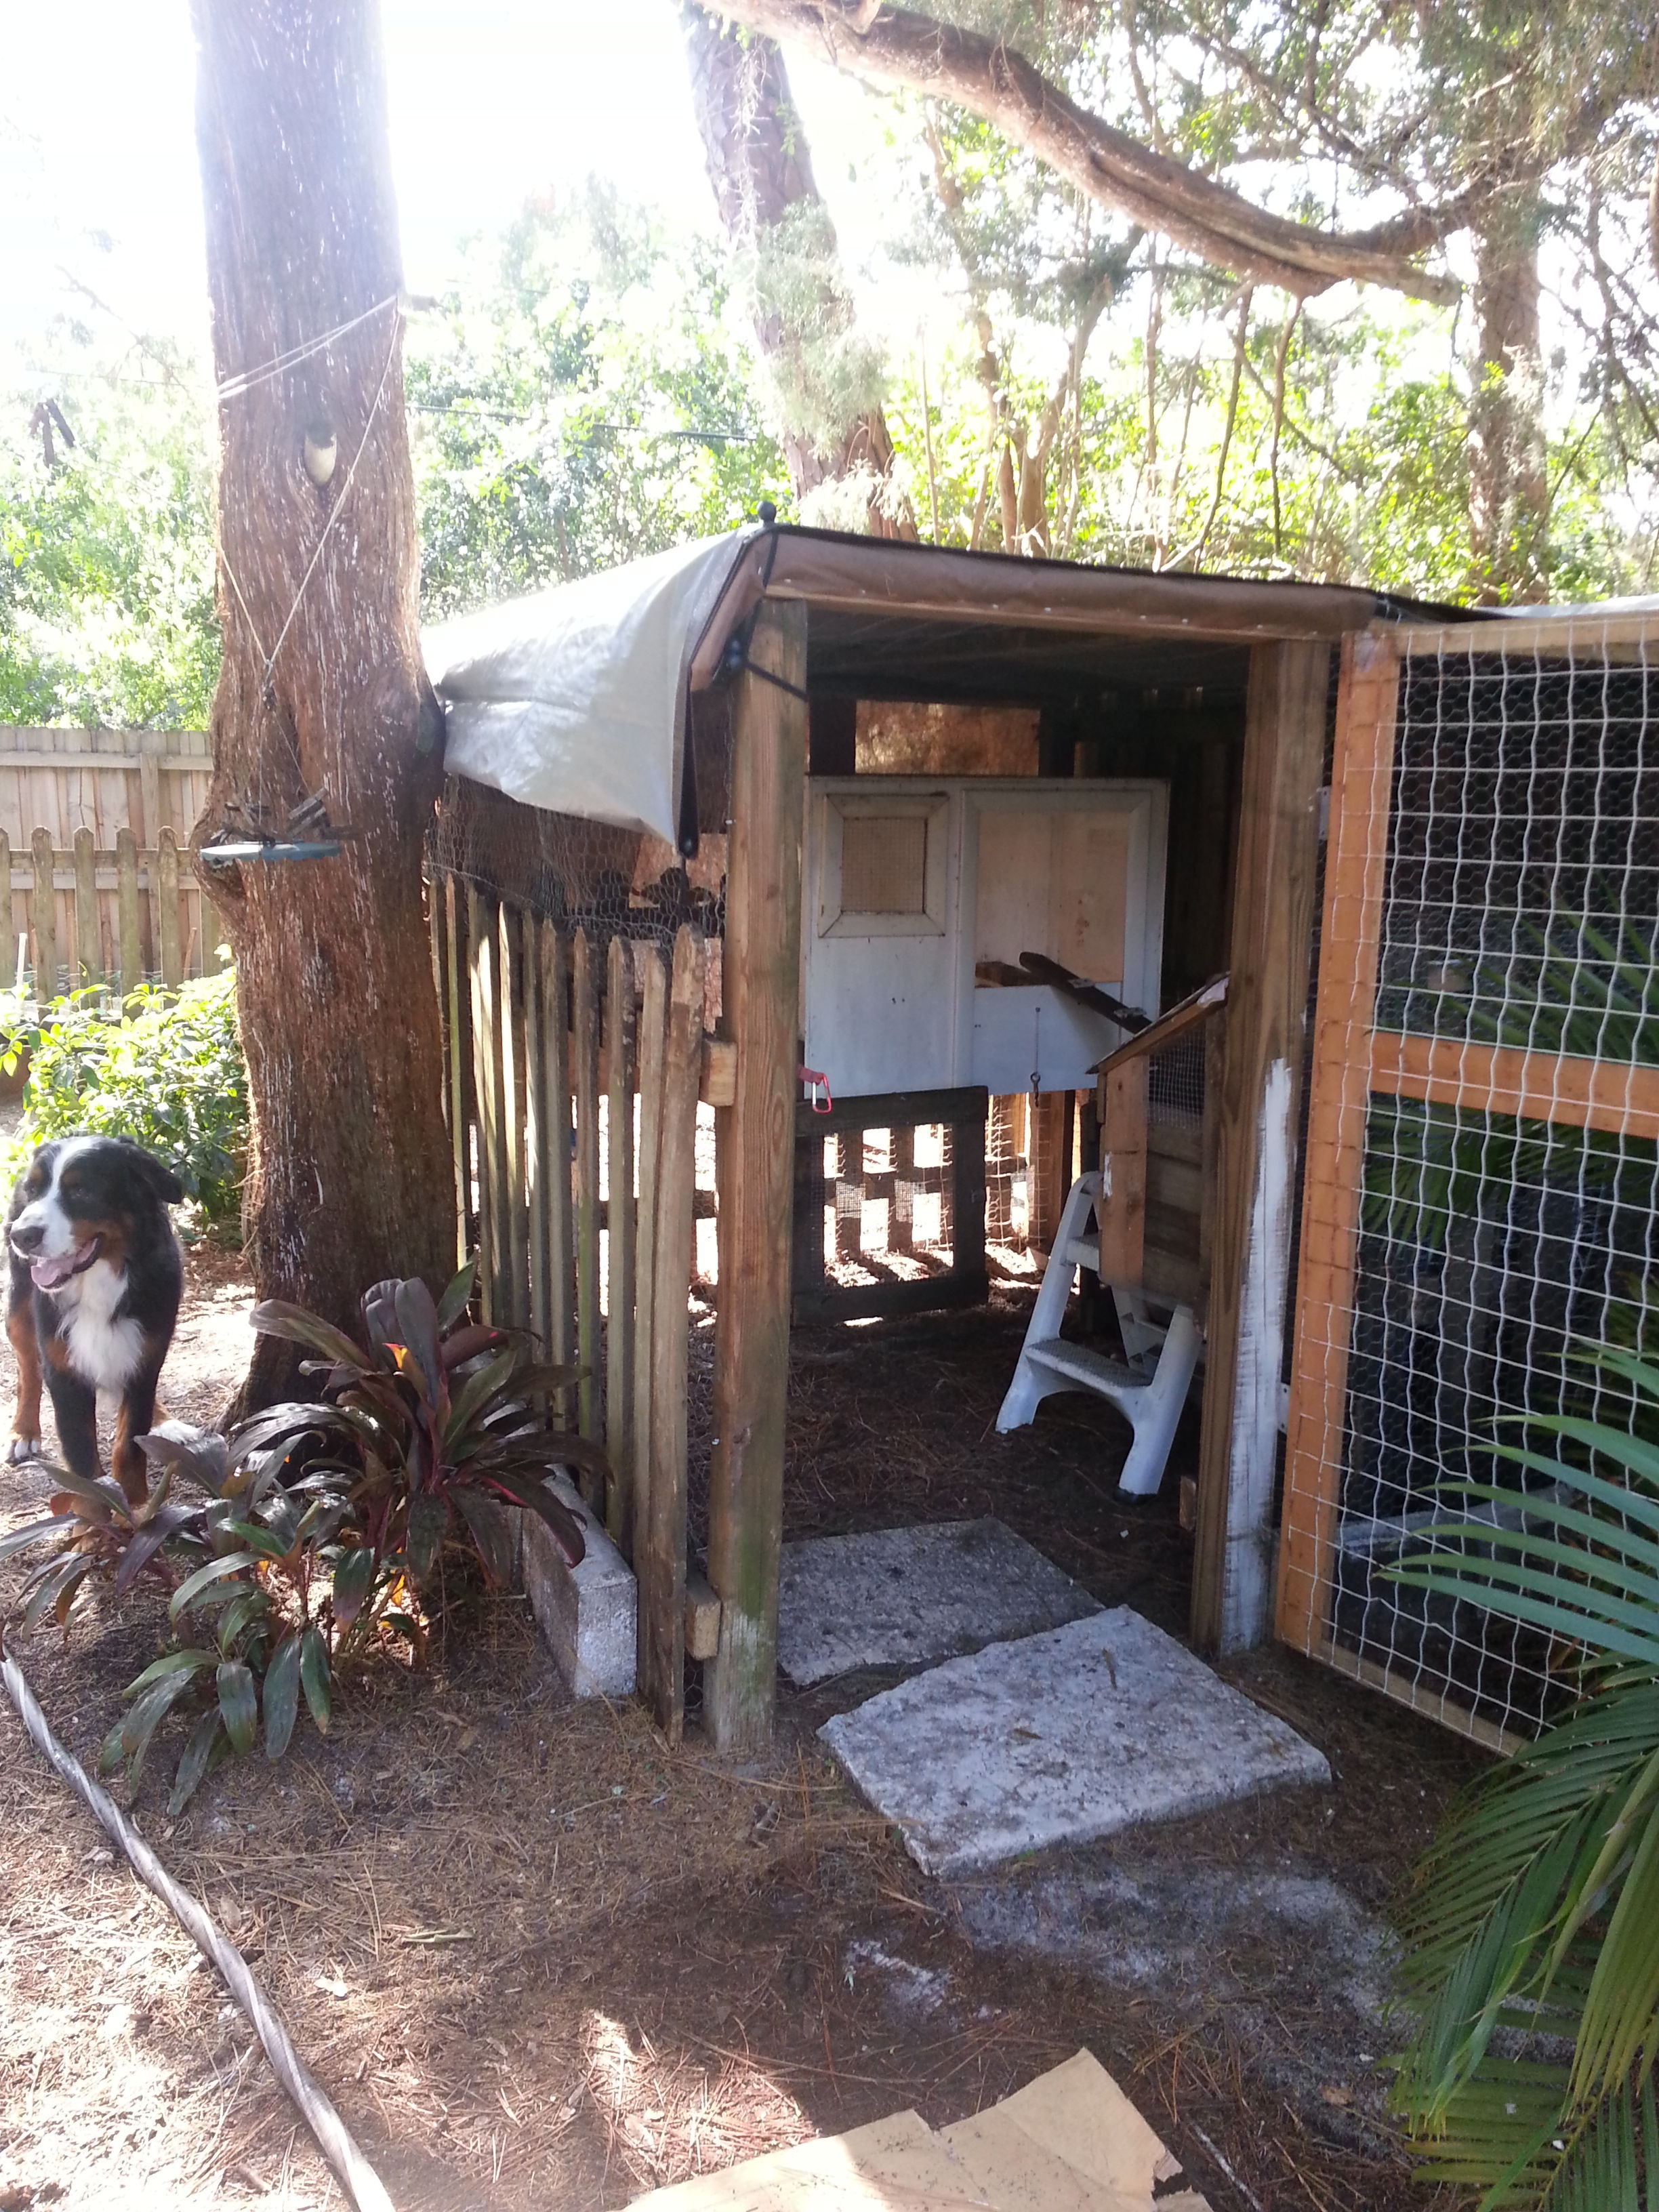 Looking into the new run through the people door. The egg box is just inside the door hanging on the wall. The step stool helps them get in the eggbox or in the coop (white box along the far wall). This photo shows the window on the coop made for increased ventilation. The brown wall behind the coop is just fencing with weedblock cloth being used for shade, without cutting off airflow. Works well!